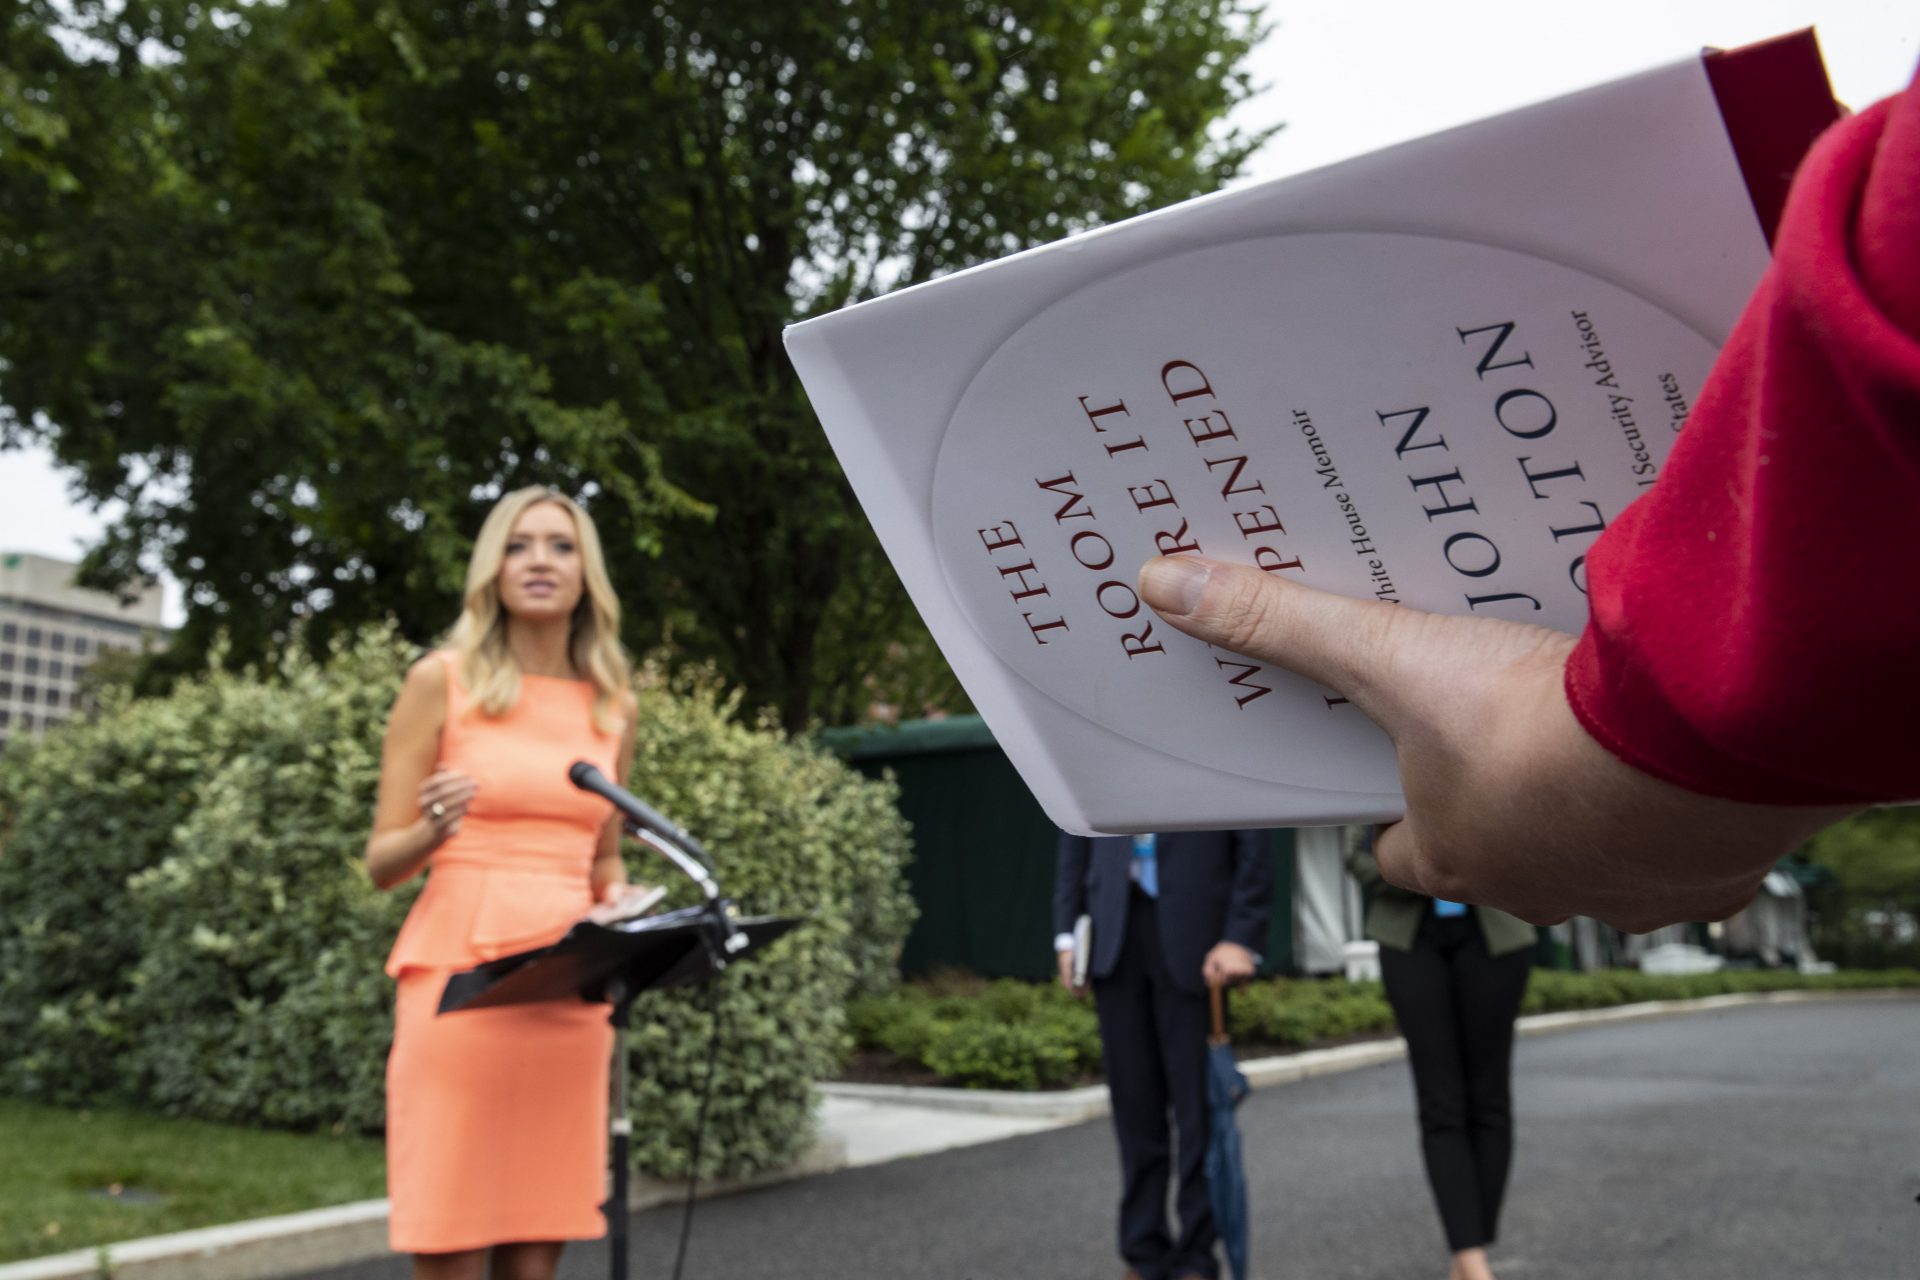 CBS White House correspondent Paula Reid, right, holds a copy of John Bolton's "The Room Where It Happened," as she asks a question of White House press secretary Kayleigh McEnany, at the White House, Thursday, June 18, 2020, in Washington.